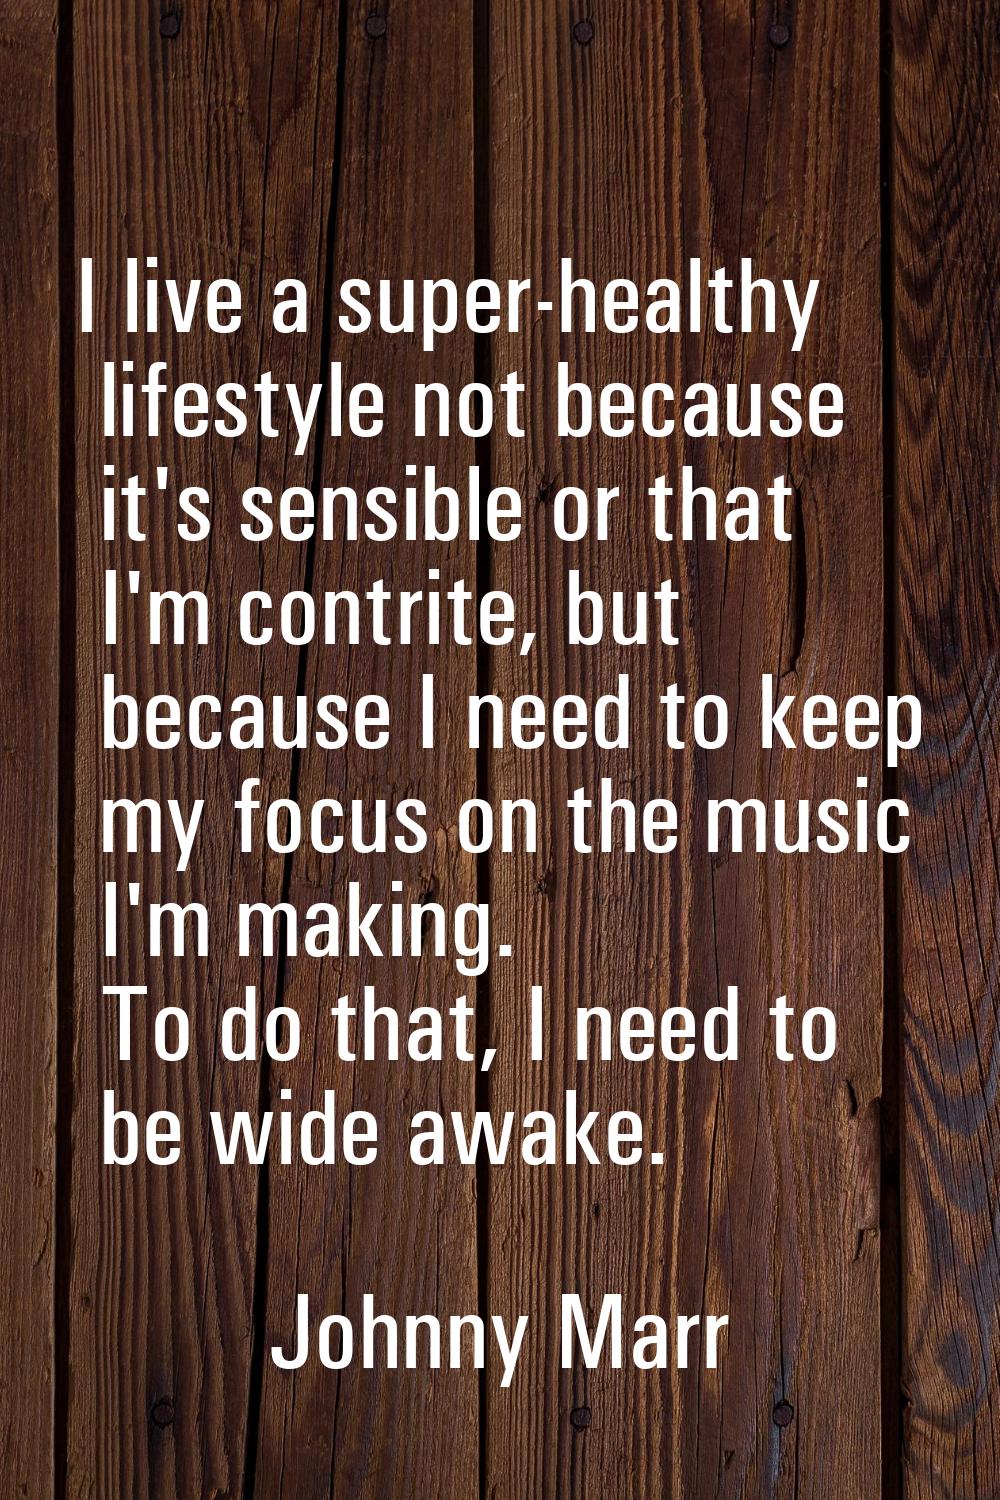 I live a super-healthy lifestyle not because it's sensible or that I'm contrite, but because I need